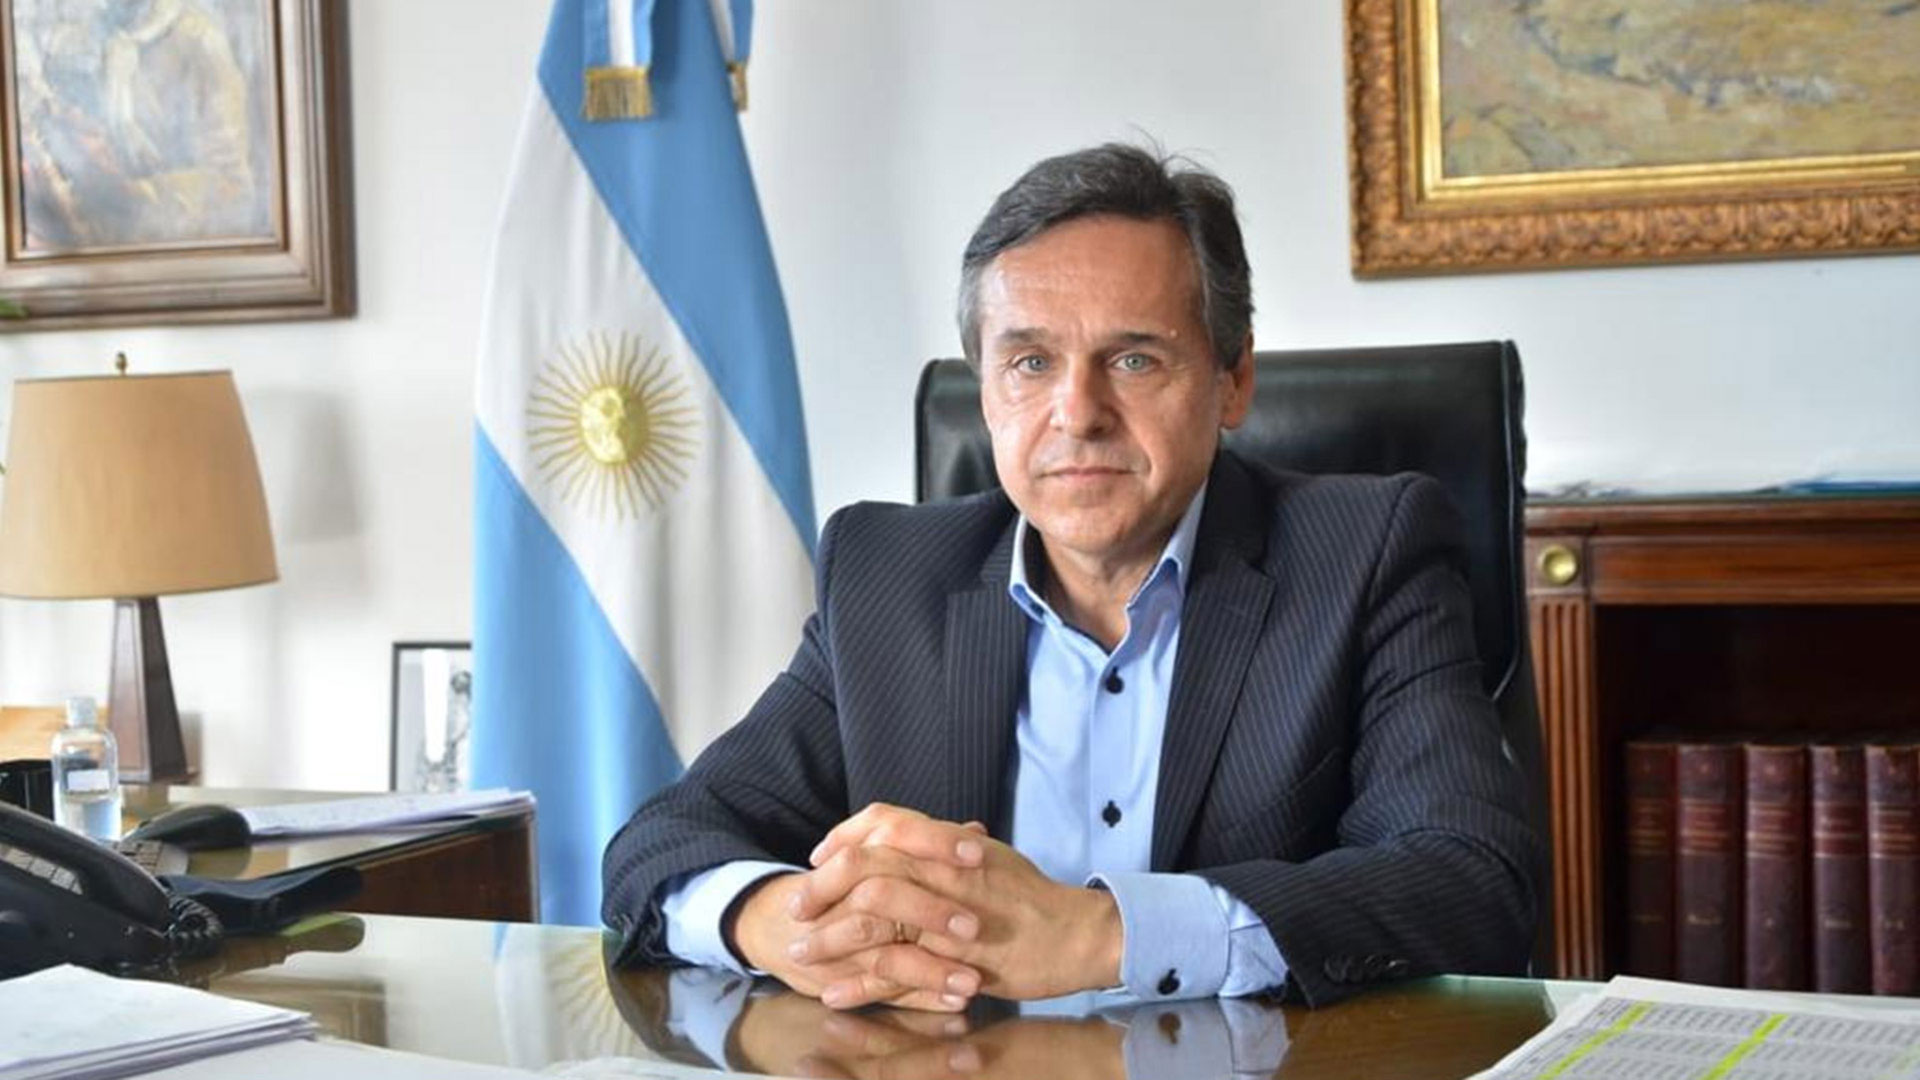 Diego Giuliano, Minister of Transportation of the Nation